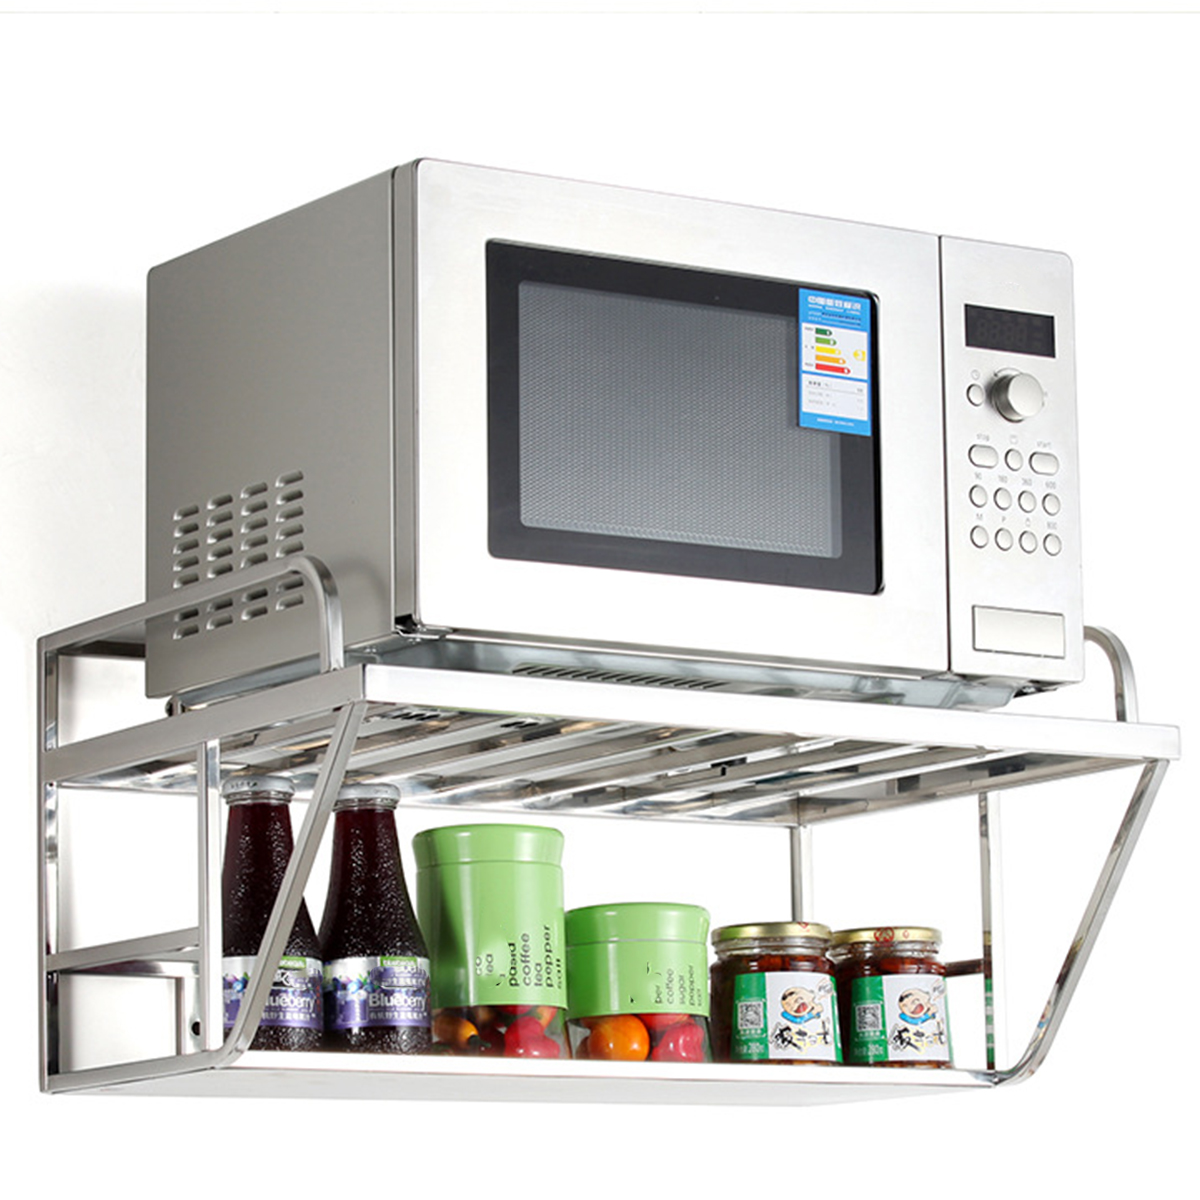 Double-Layer-Microwave-Oven-Stand-Stainless-Steel-Storage-Rack-Shelf-Hanging-Space-Saving-Kitchen-Br-1763142-9